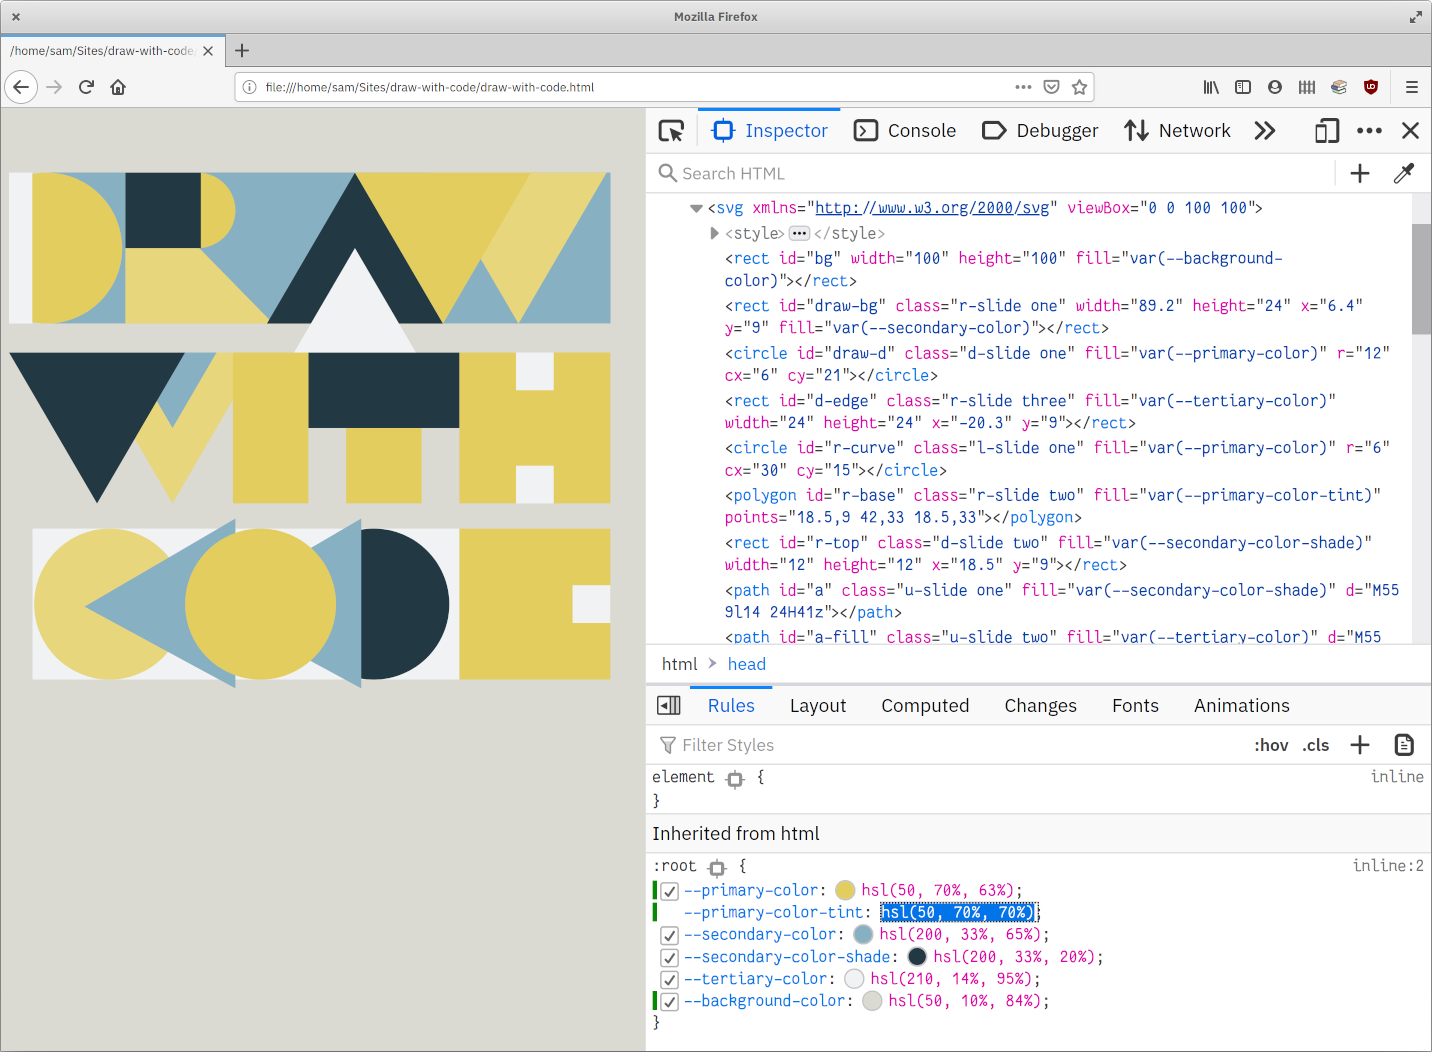 screenshot of the SVG in Firefox Dev Tools, with its red colors changed to yellow